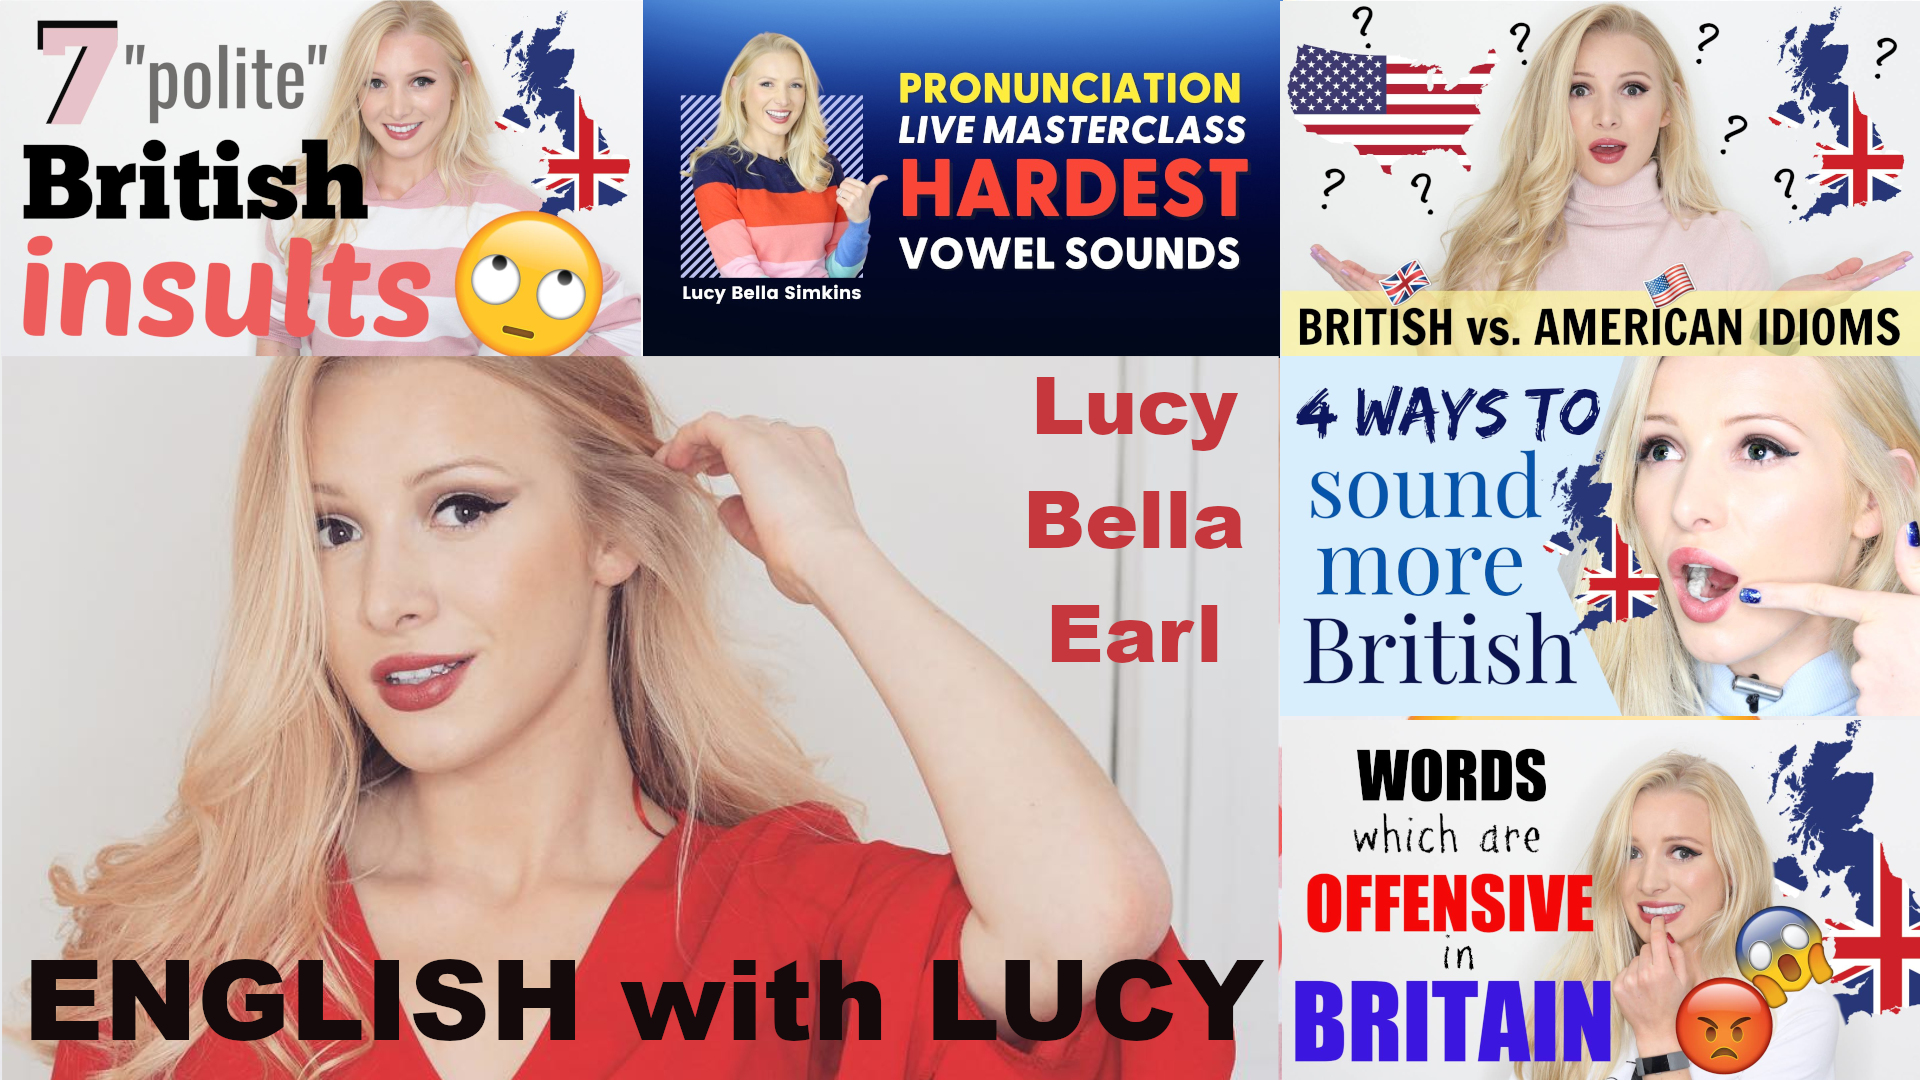 YouTuber English with Lucy Makes a Filthy Video FAKE